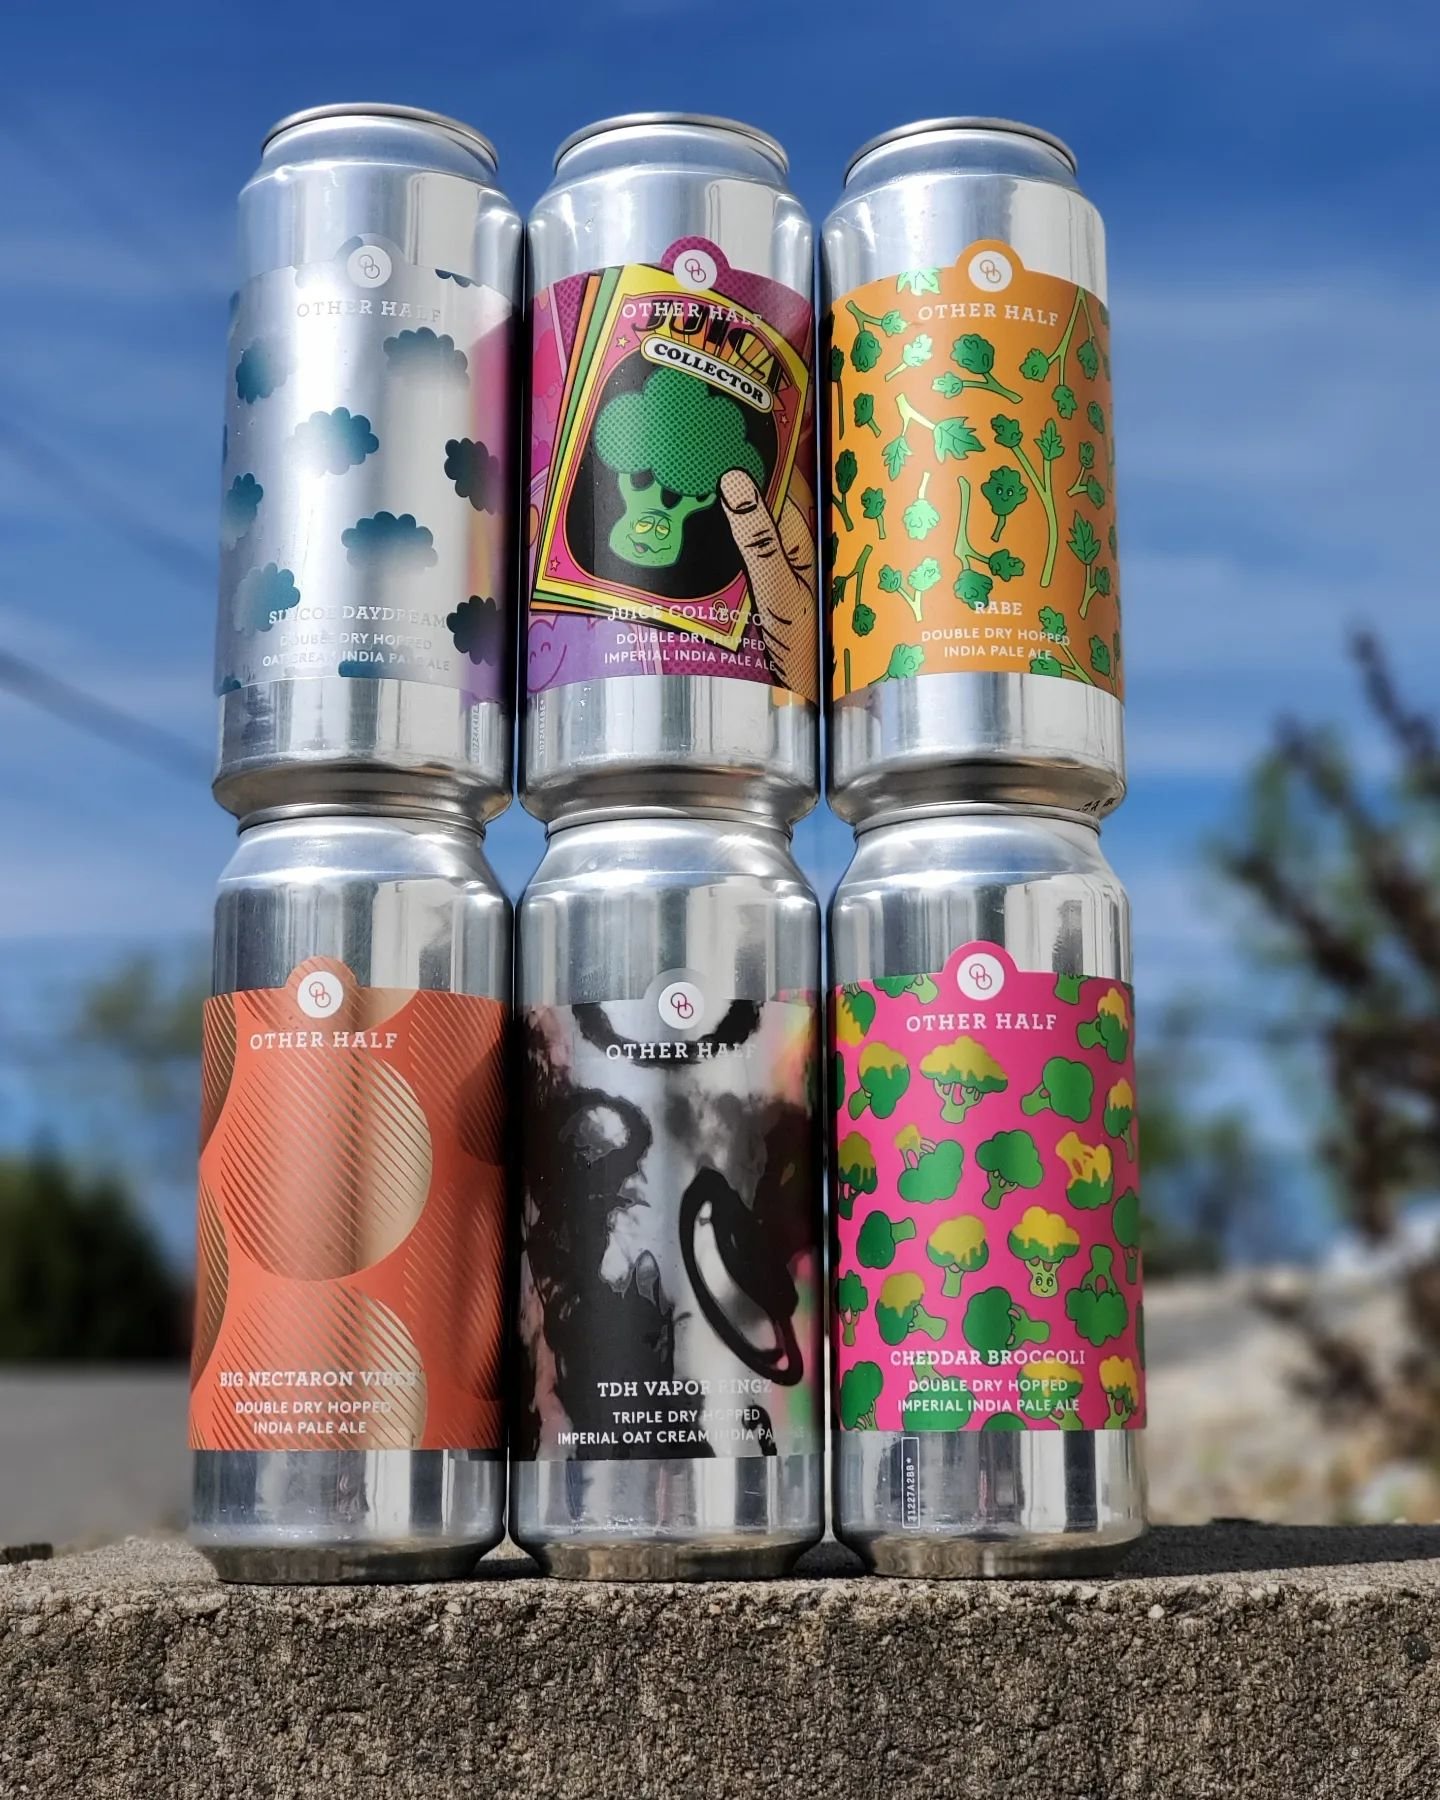 Happy weekend, everyone! Lots of hoppy goodness rolling in today, including some brand new Other Half. 🍺Juice Collector and 🍺Big Nectaron Vibes are here for the first time, and we also have Simcoe Daydream, Rabe, TDH Vapor Ringz, and Cheddar Brocco